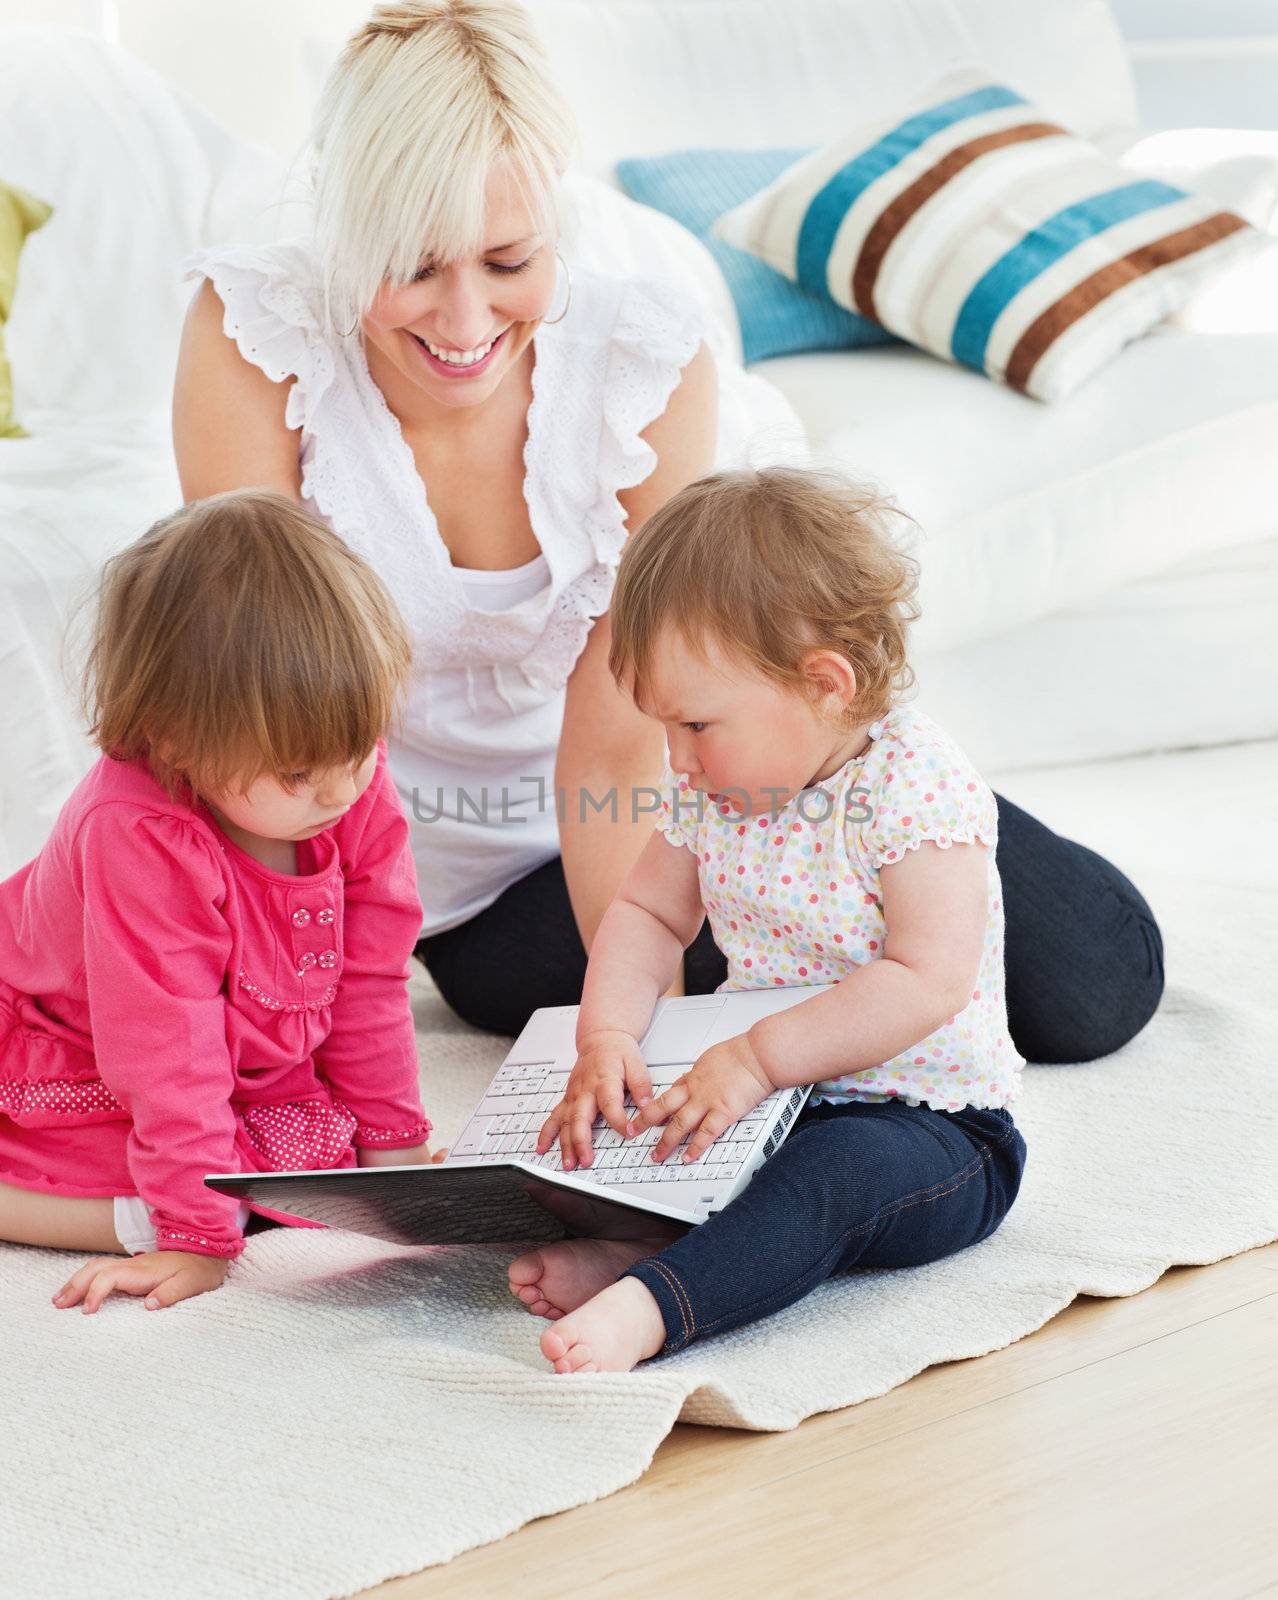 Pretty woman working with her children at laptop in living room